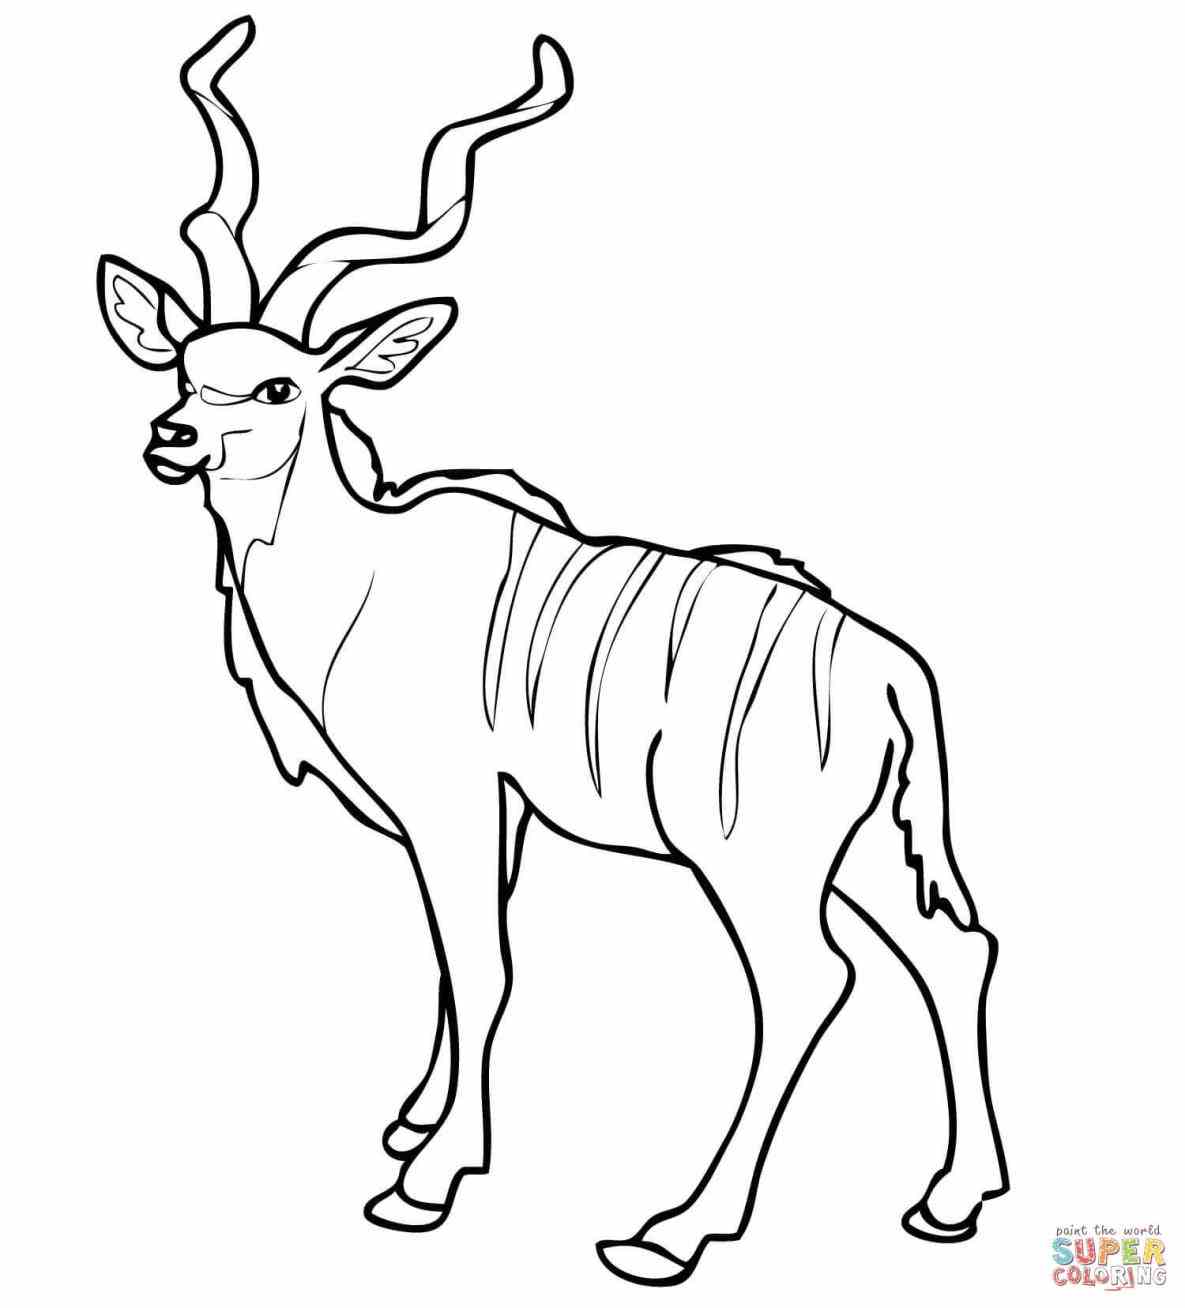 Impala Coloring Pages at GetColorings.com | Free printable colorings